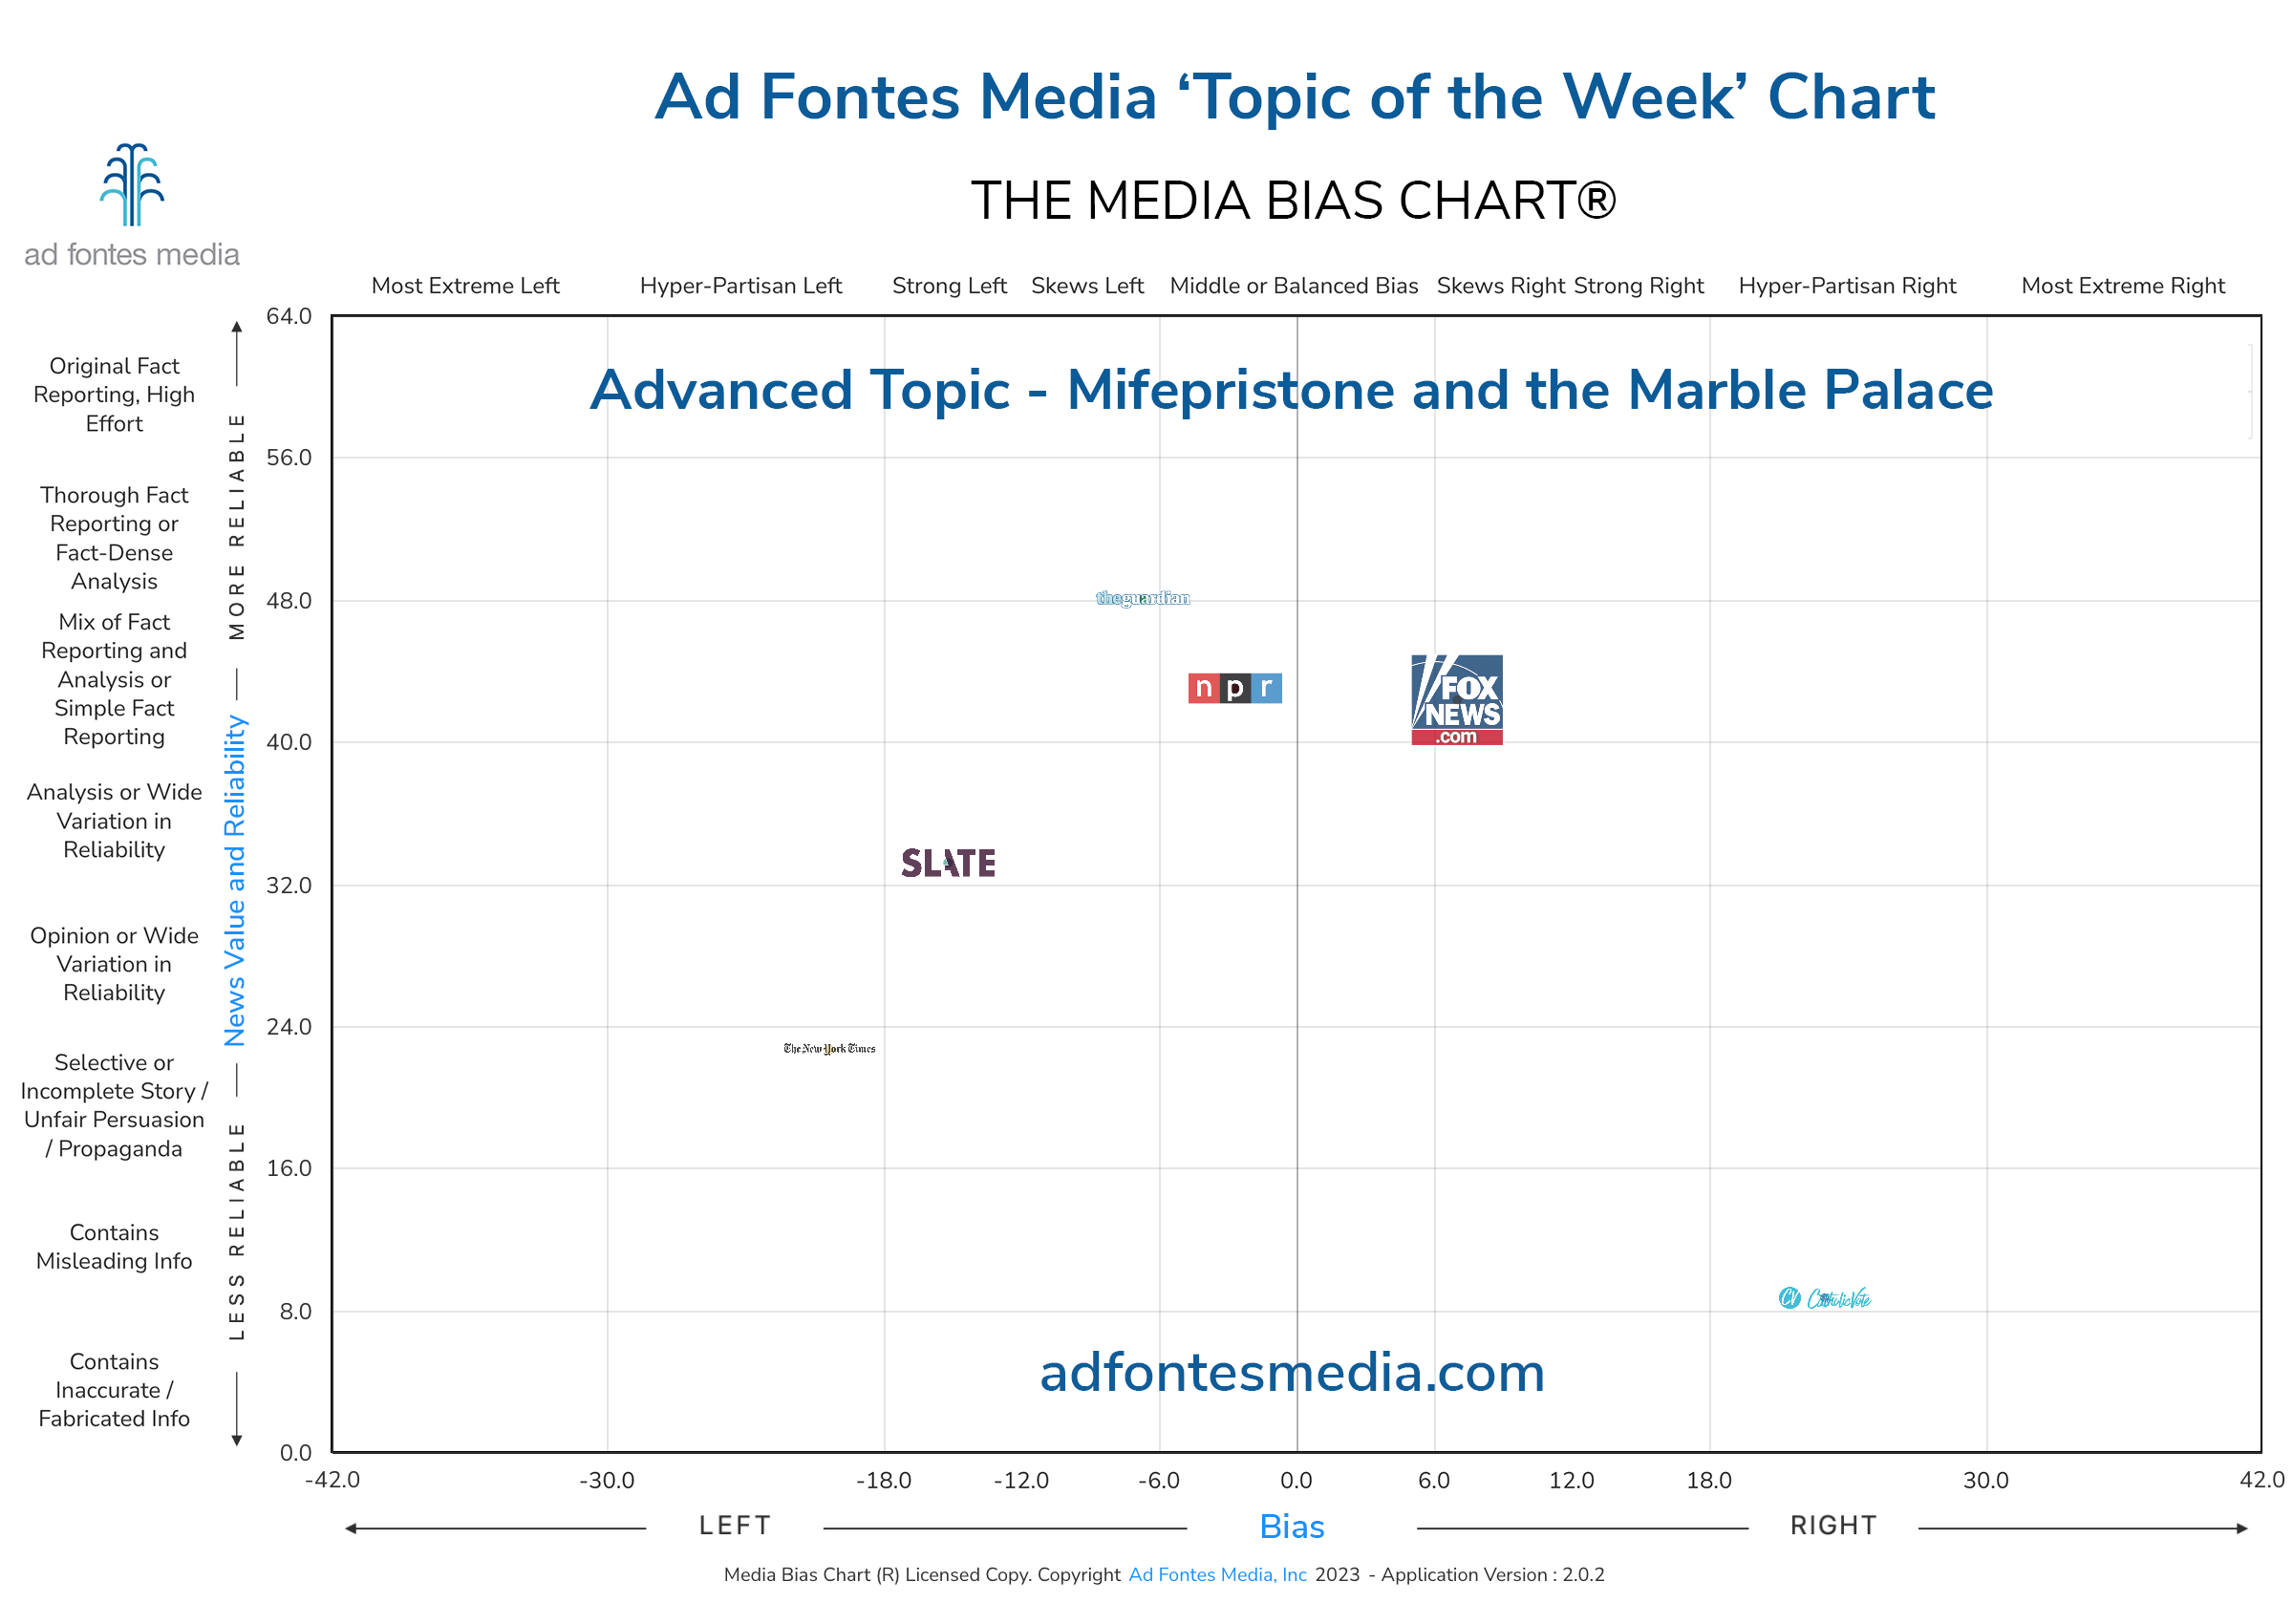 Scores of the Mifepristone and the Marble Palace articles on the chart